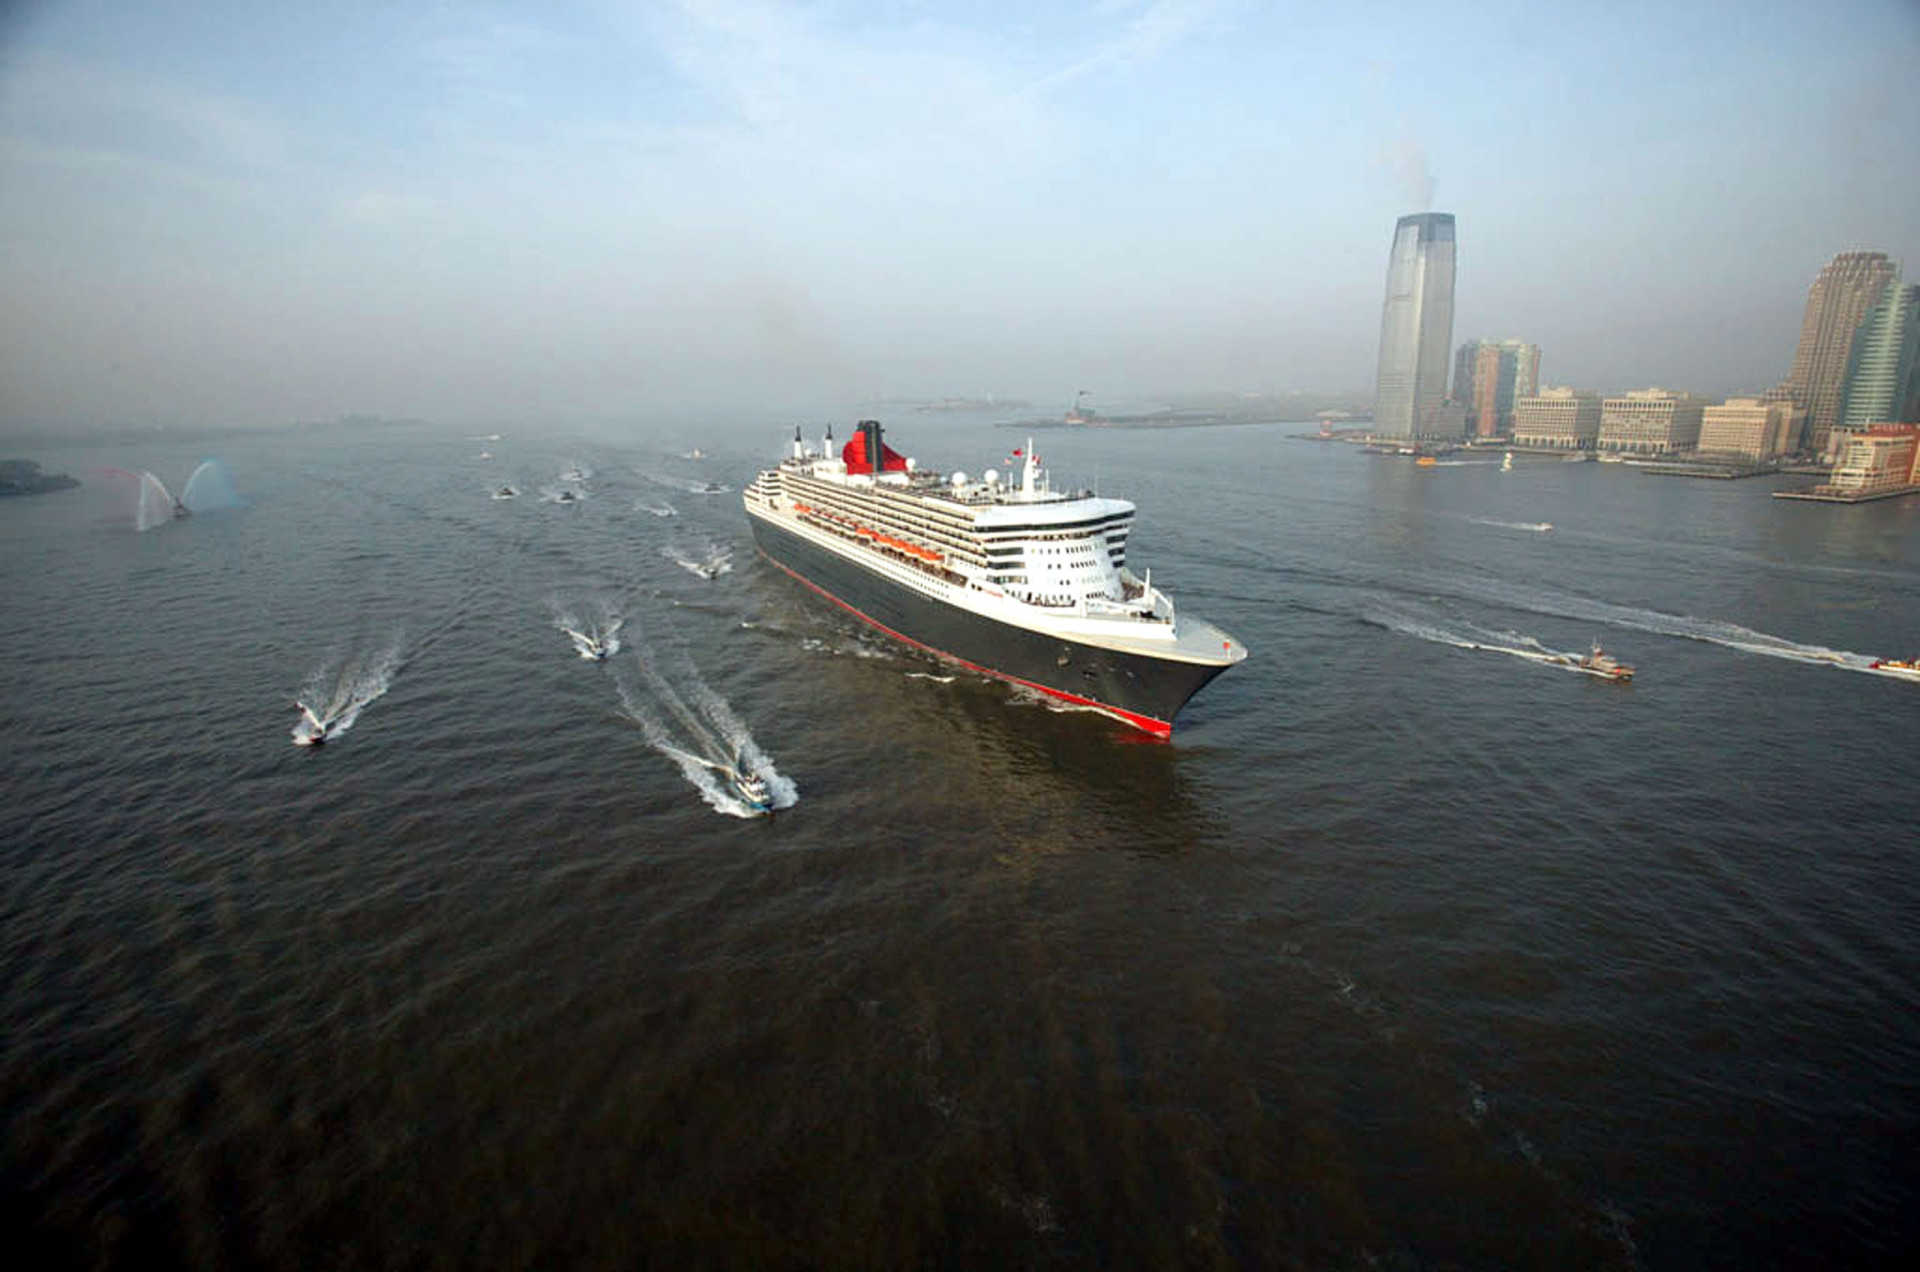 <p>Queen Mary 2 is the only transatlantic ocean liner in regular service between Southampton, in England, and New York City. Providing a luxurious experience, the liner also offers route options across the world for US$340,000 per person.</p>